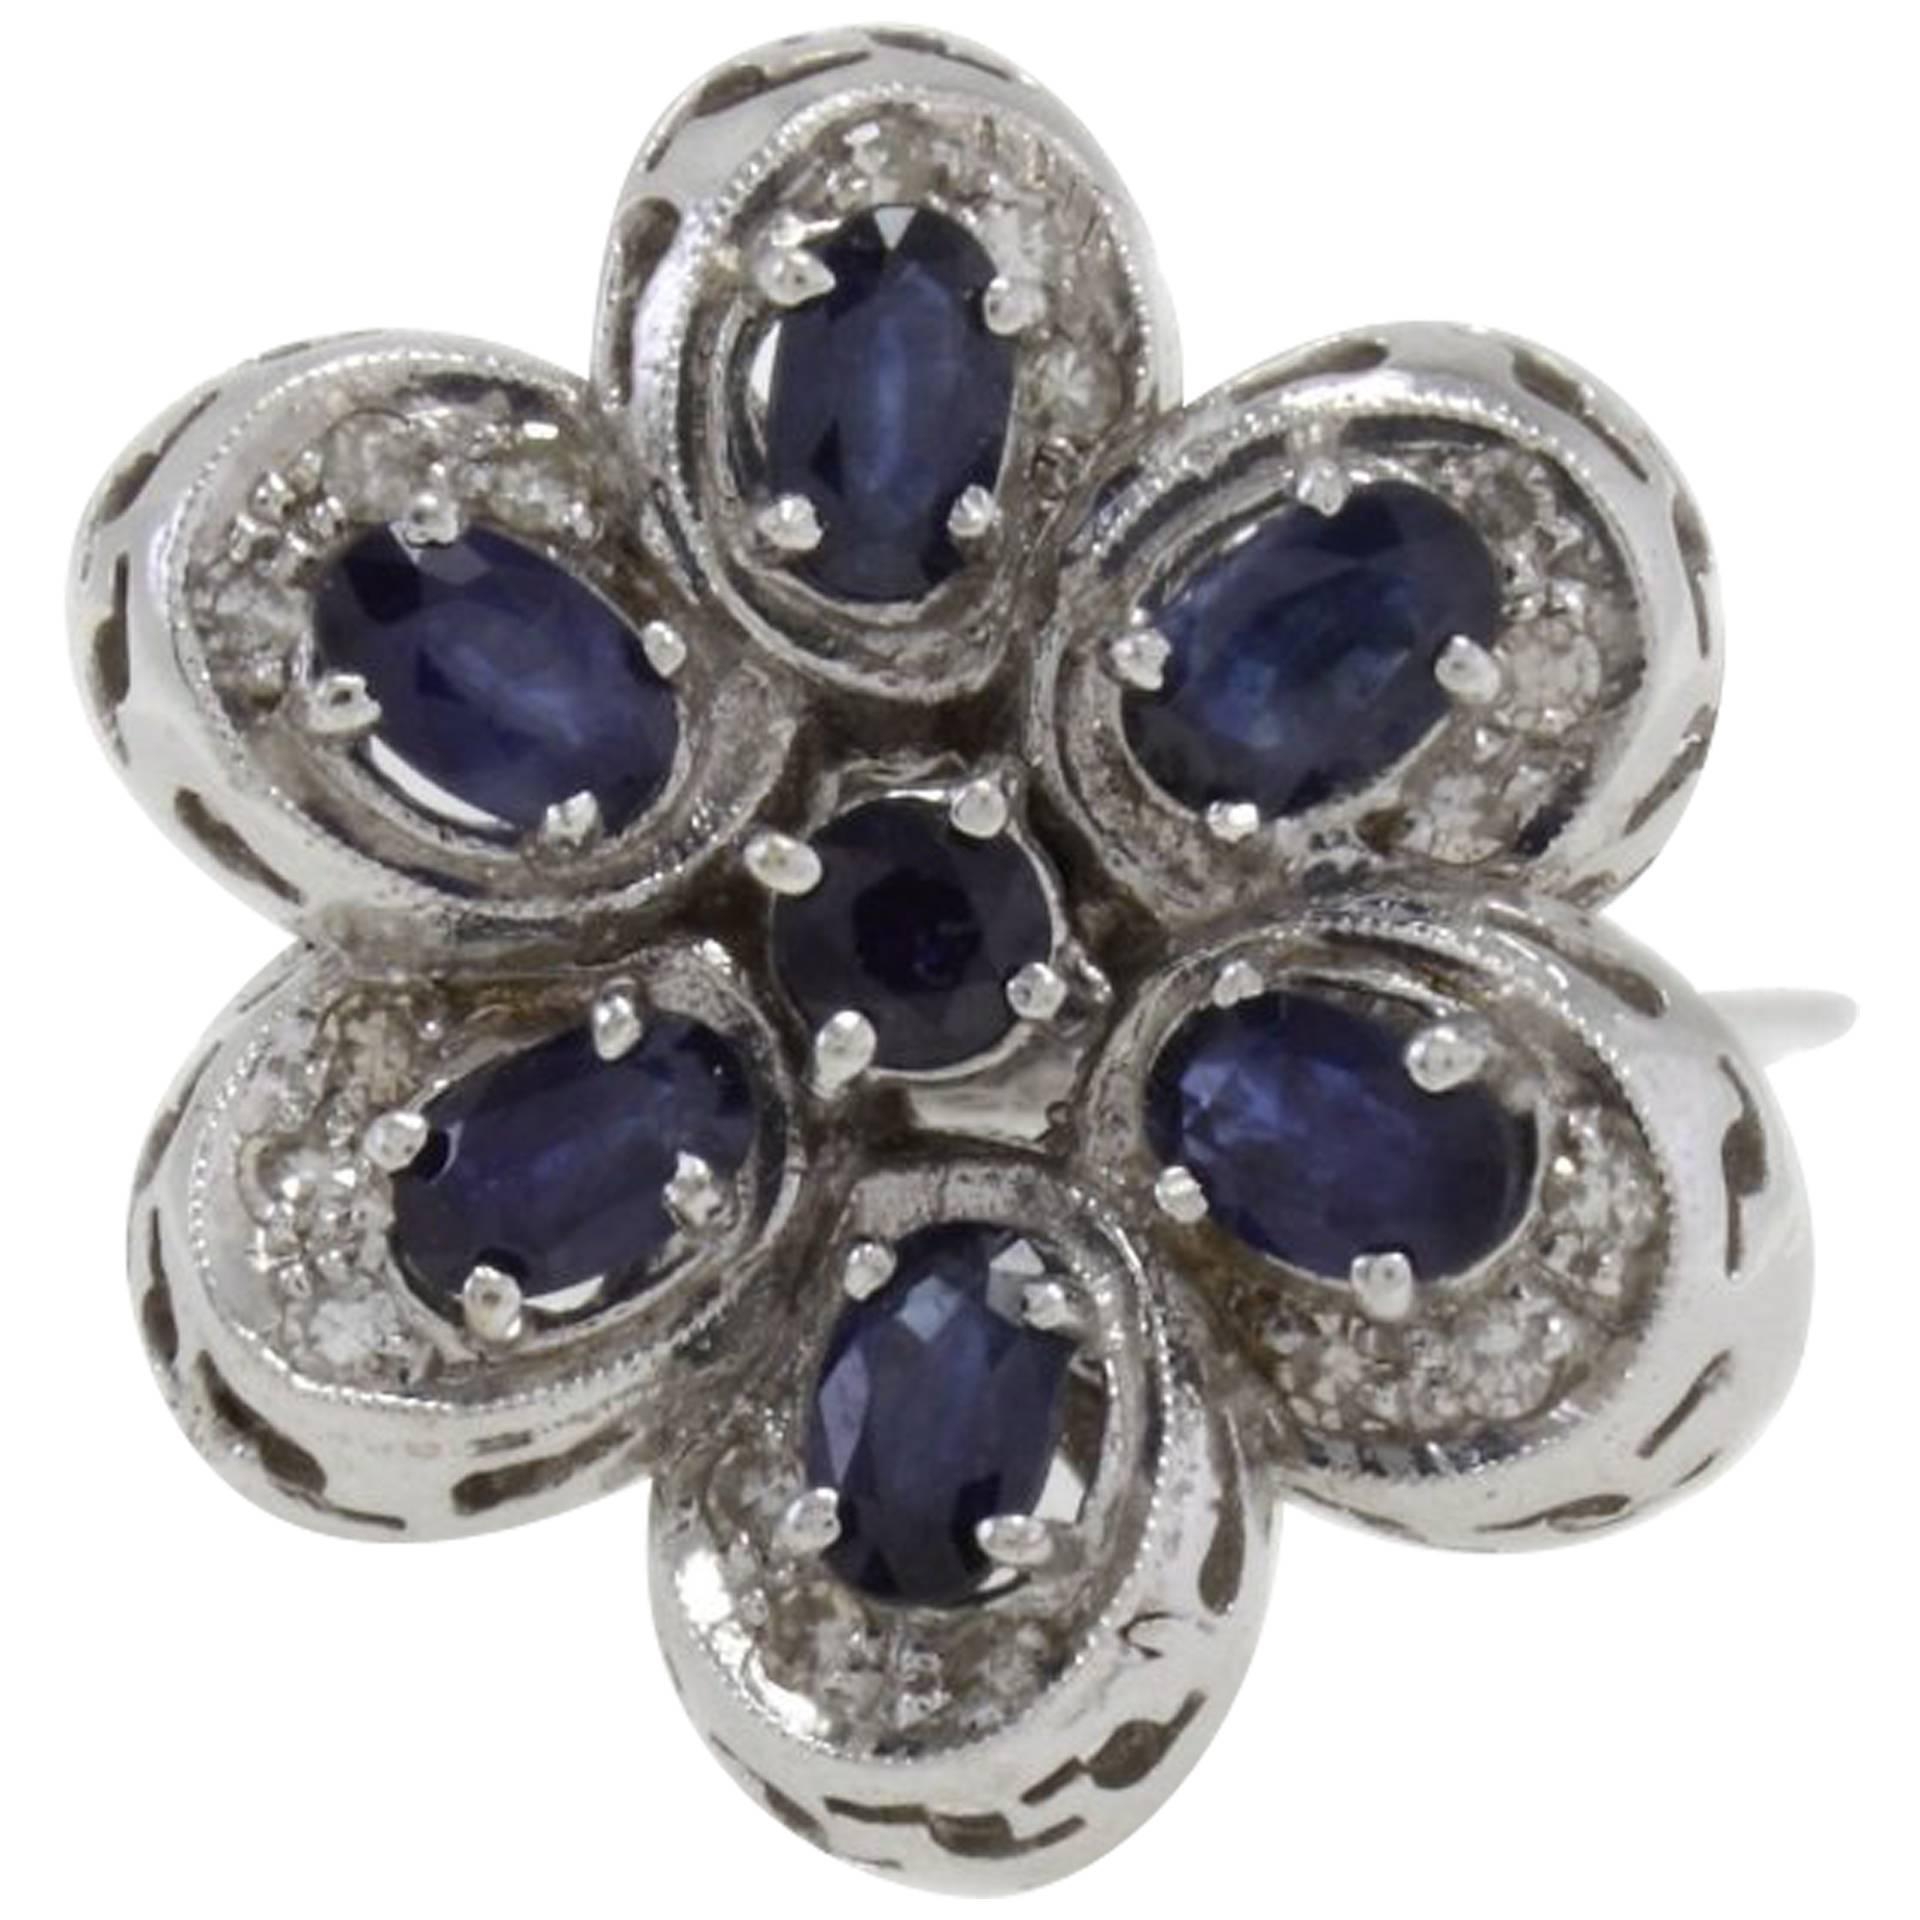 Flower shaped  fashion ring in 18k white gold mounted with white diamonds and blue sapphires.
Diamonds 0.32 kt
Blue Sapphires 2.55 kt
Tot.Weight 11.40 gr
R.F ggfc